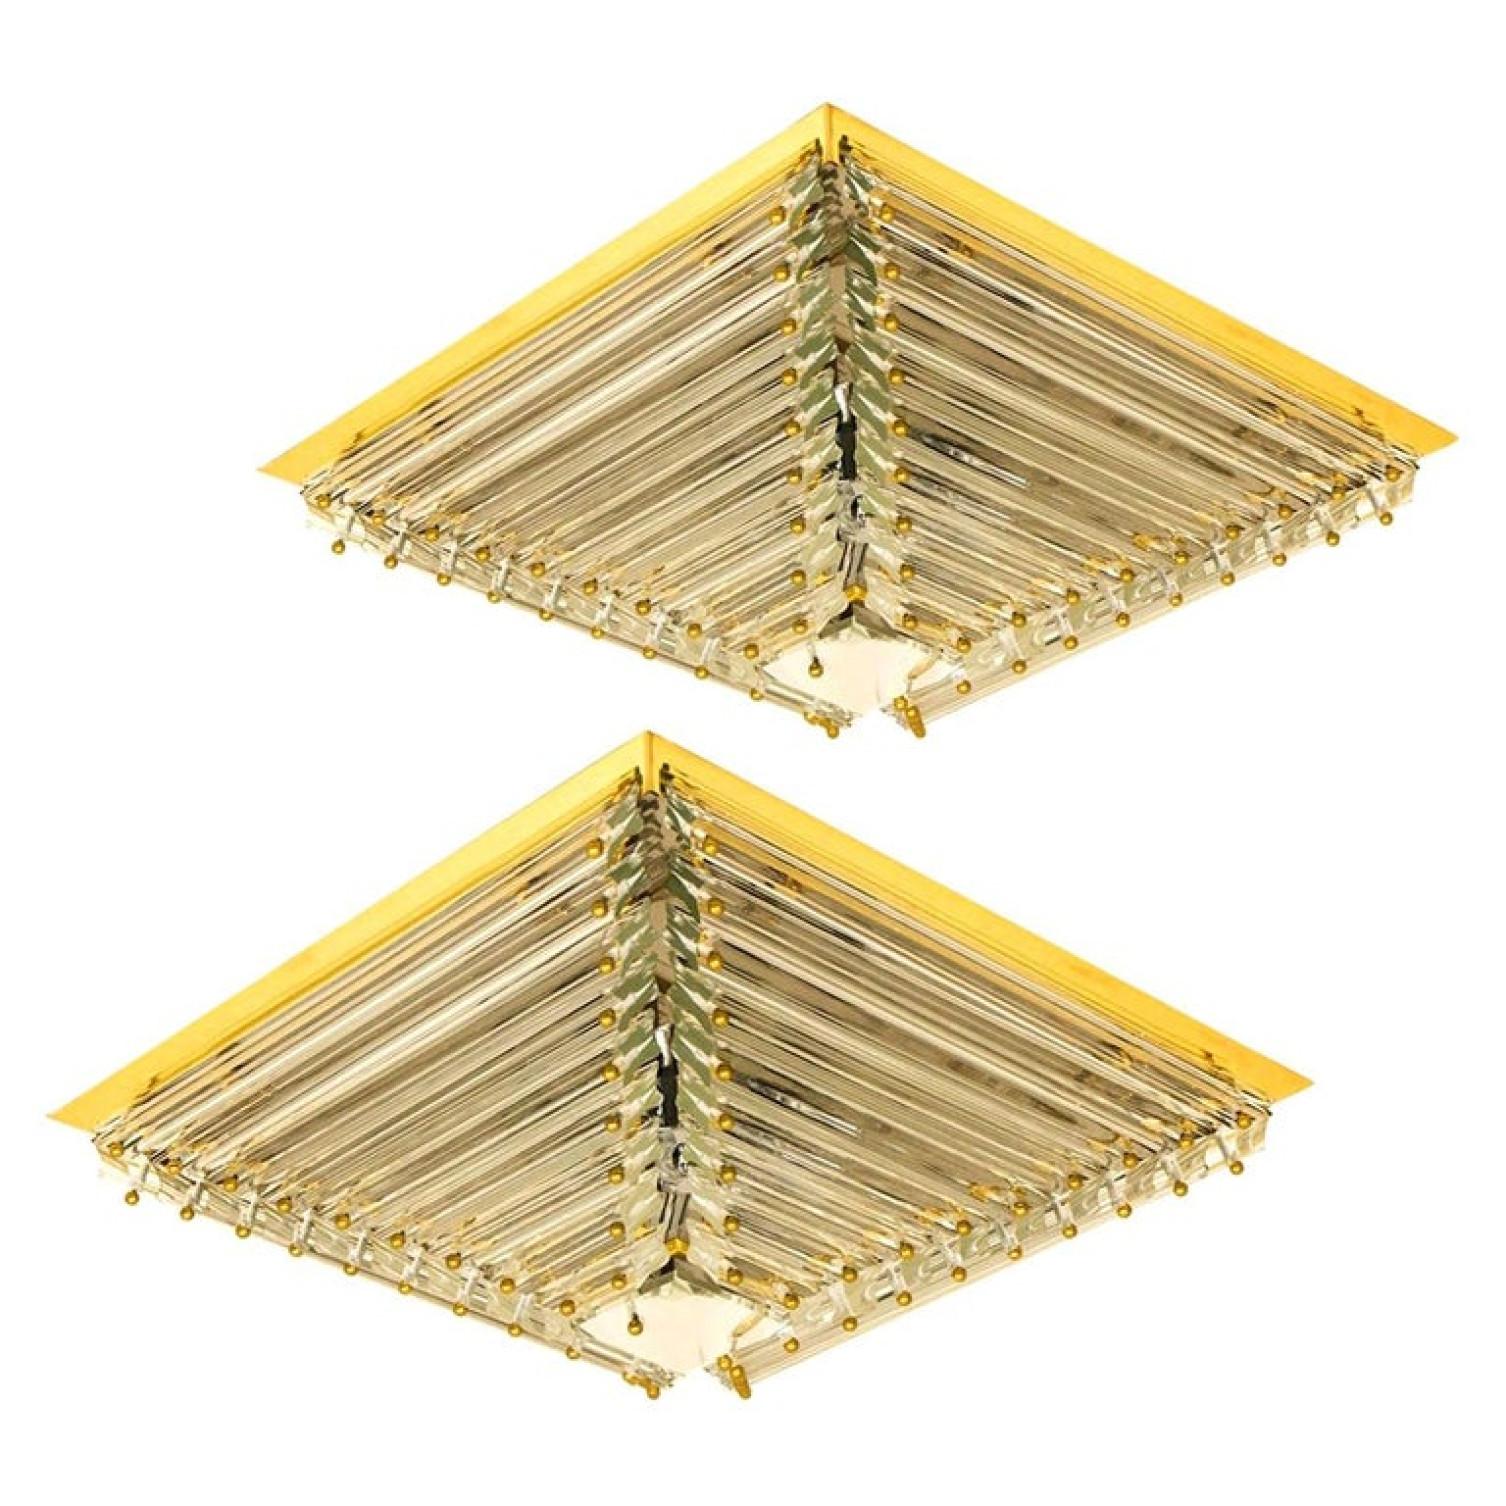 One of the two  gold-plated Venini flush mounts with faceted clear crystal tubes of Murano glass. Modellated in the form of a piramide. The flush mounts are designed and produced by Venini in Italy from the 1970s. The Murano tubes are suspended on a